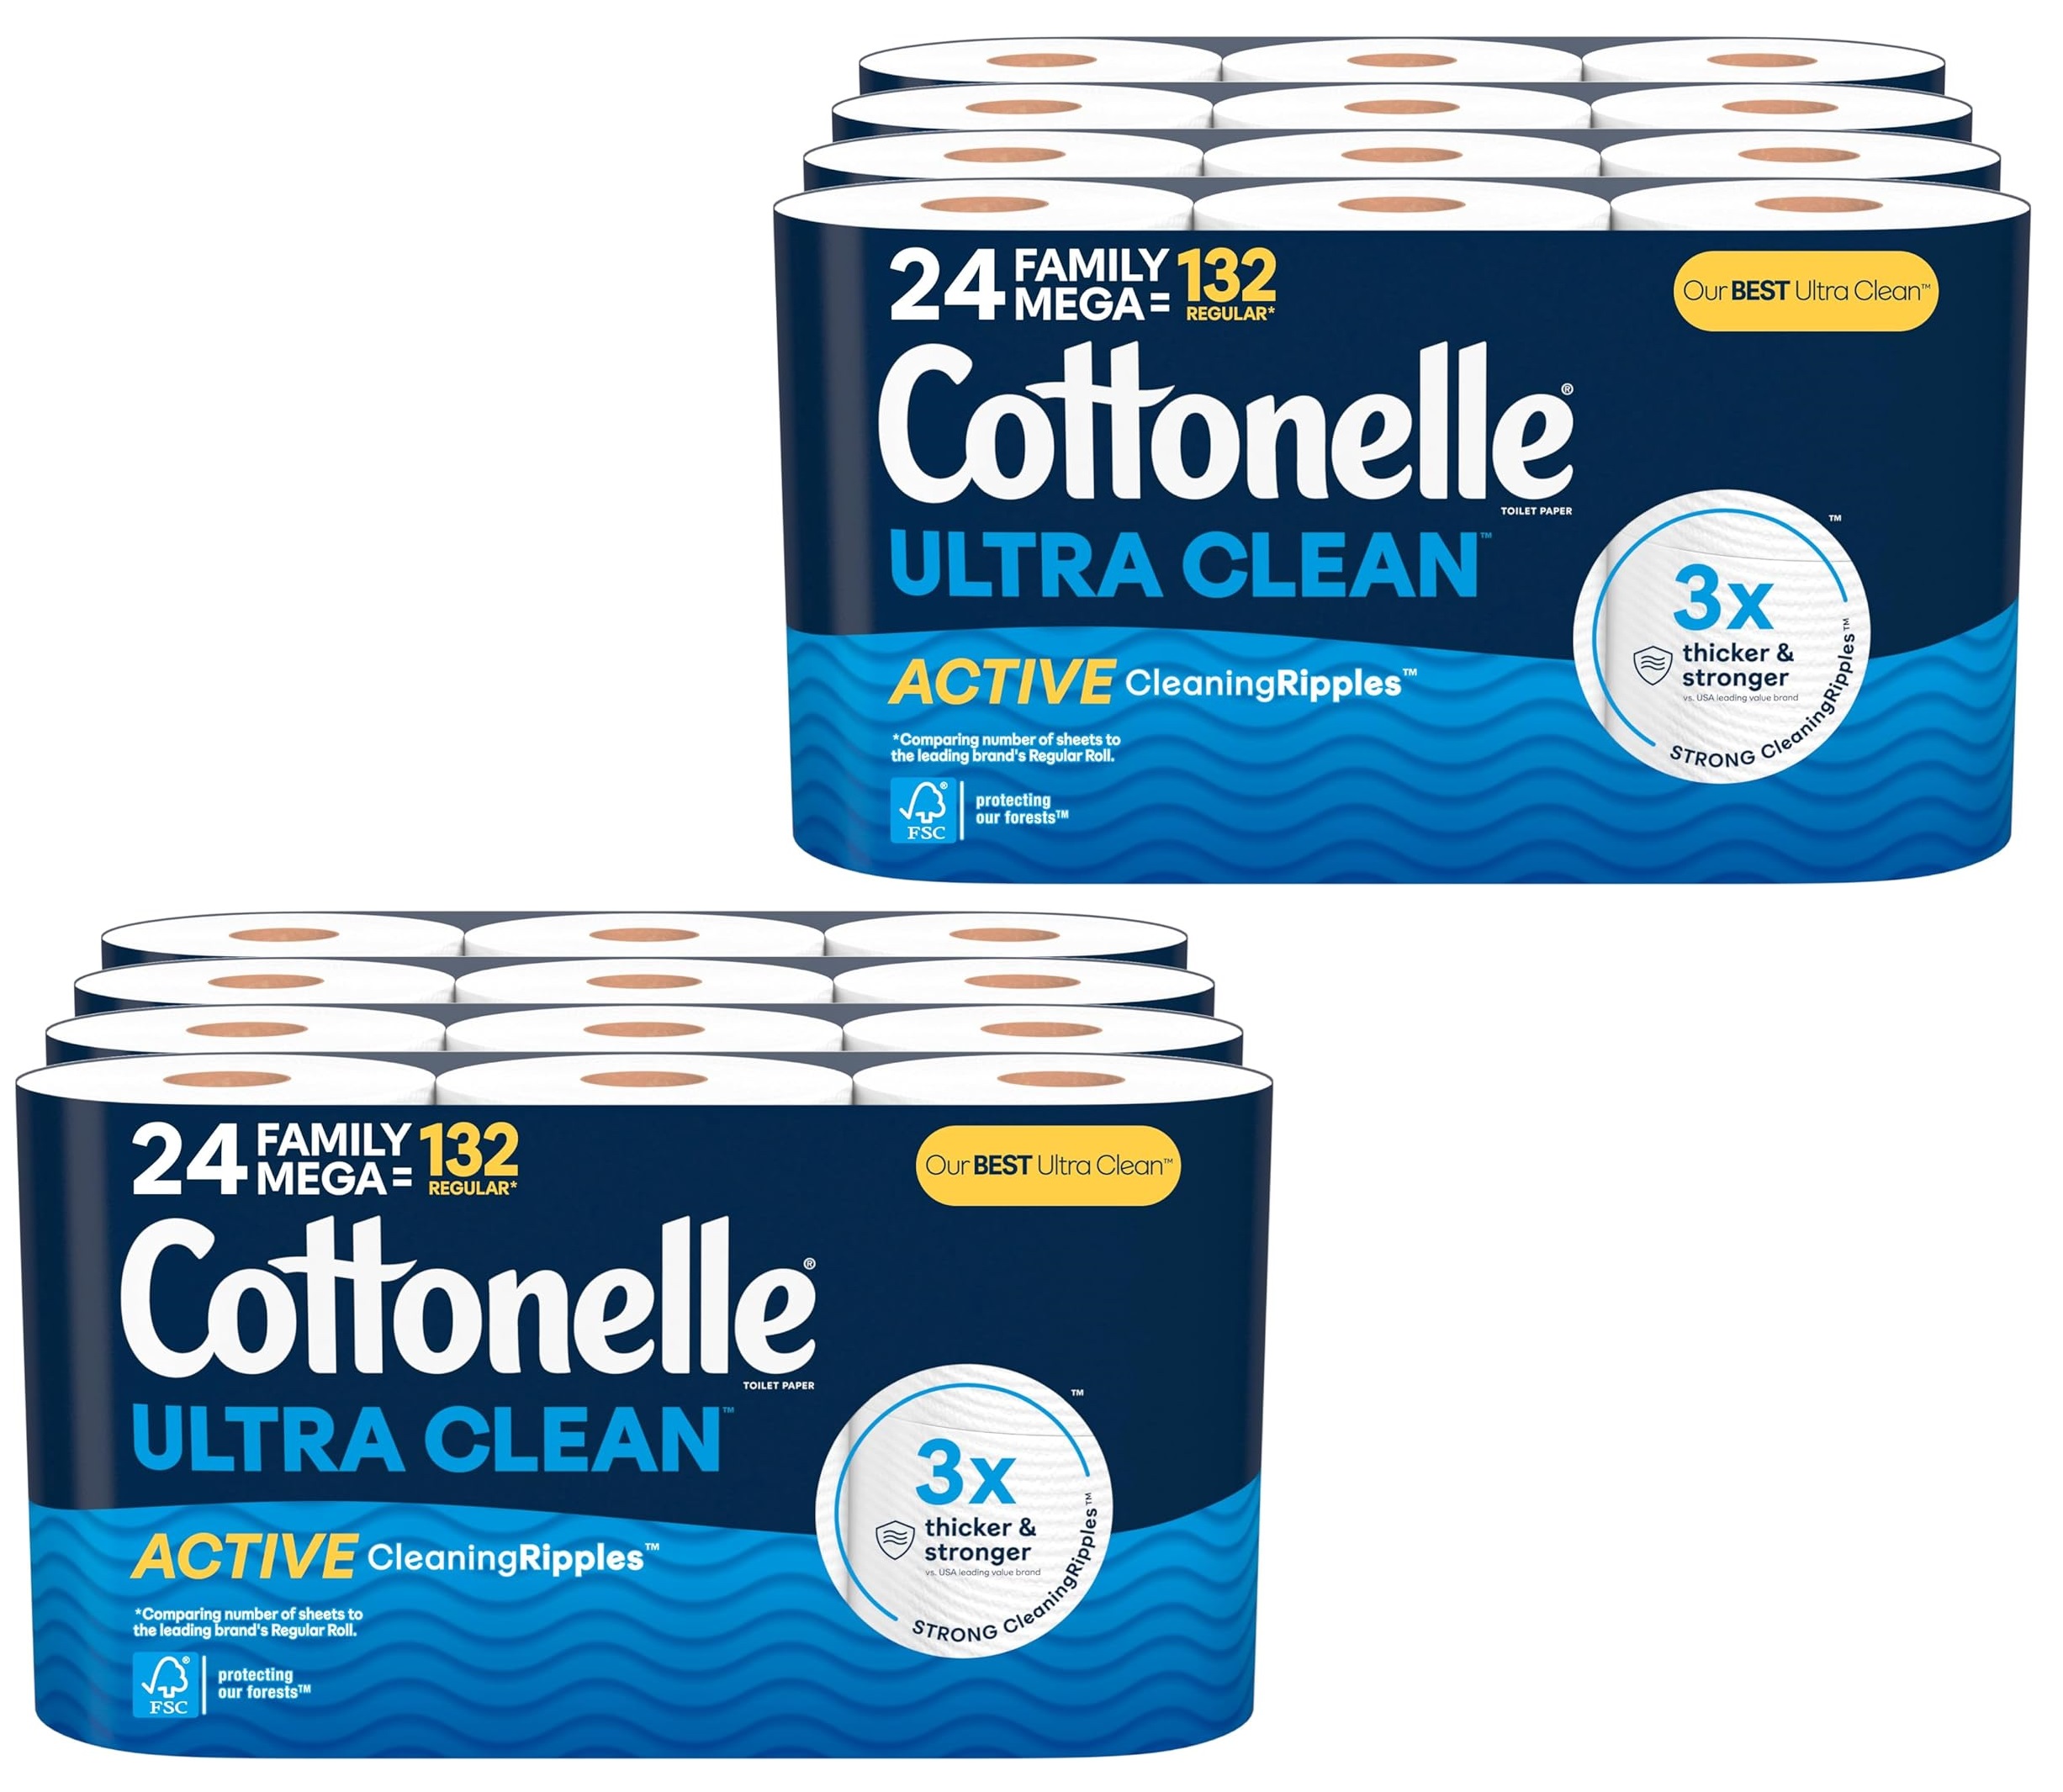 48-Count Cottonelle Ultra Comfort/Ultra Clean Family Mega Rolls + $15 Amazon Credit $46.80 w/ S&S + Free Shipping